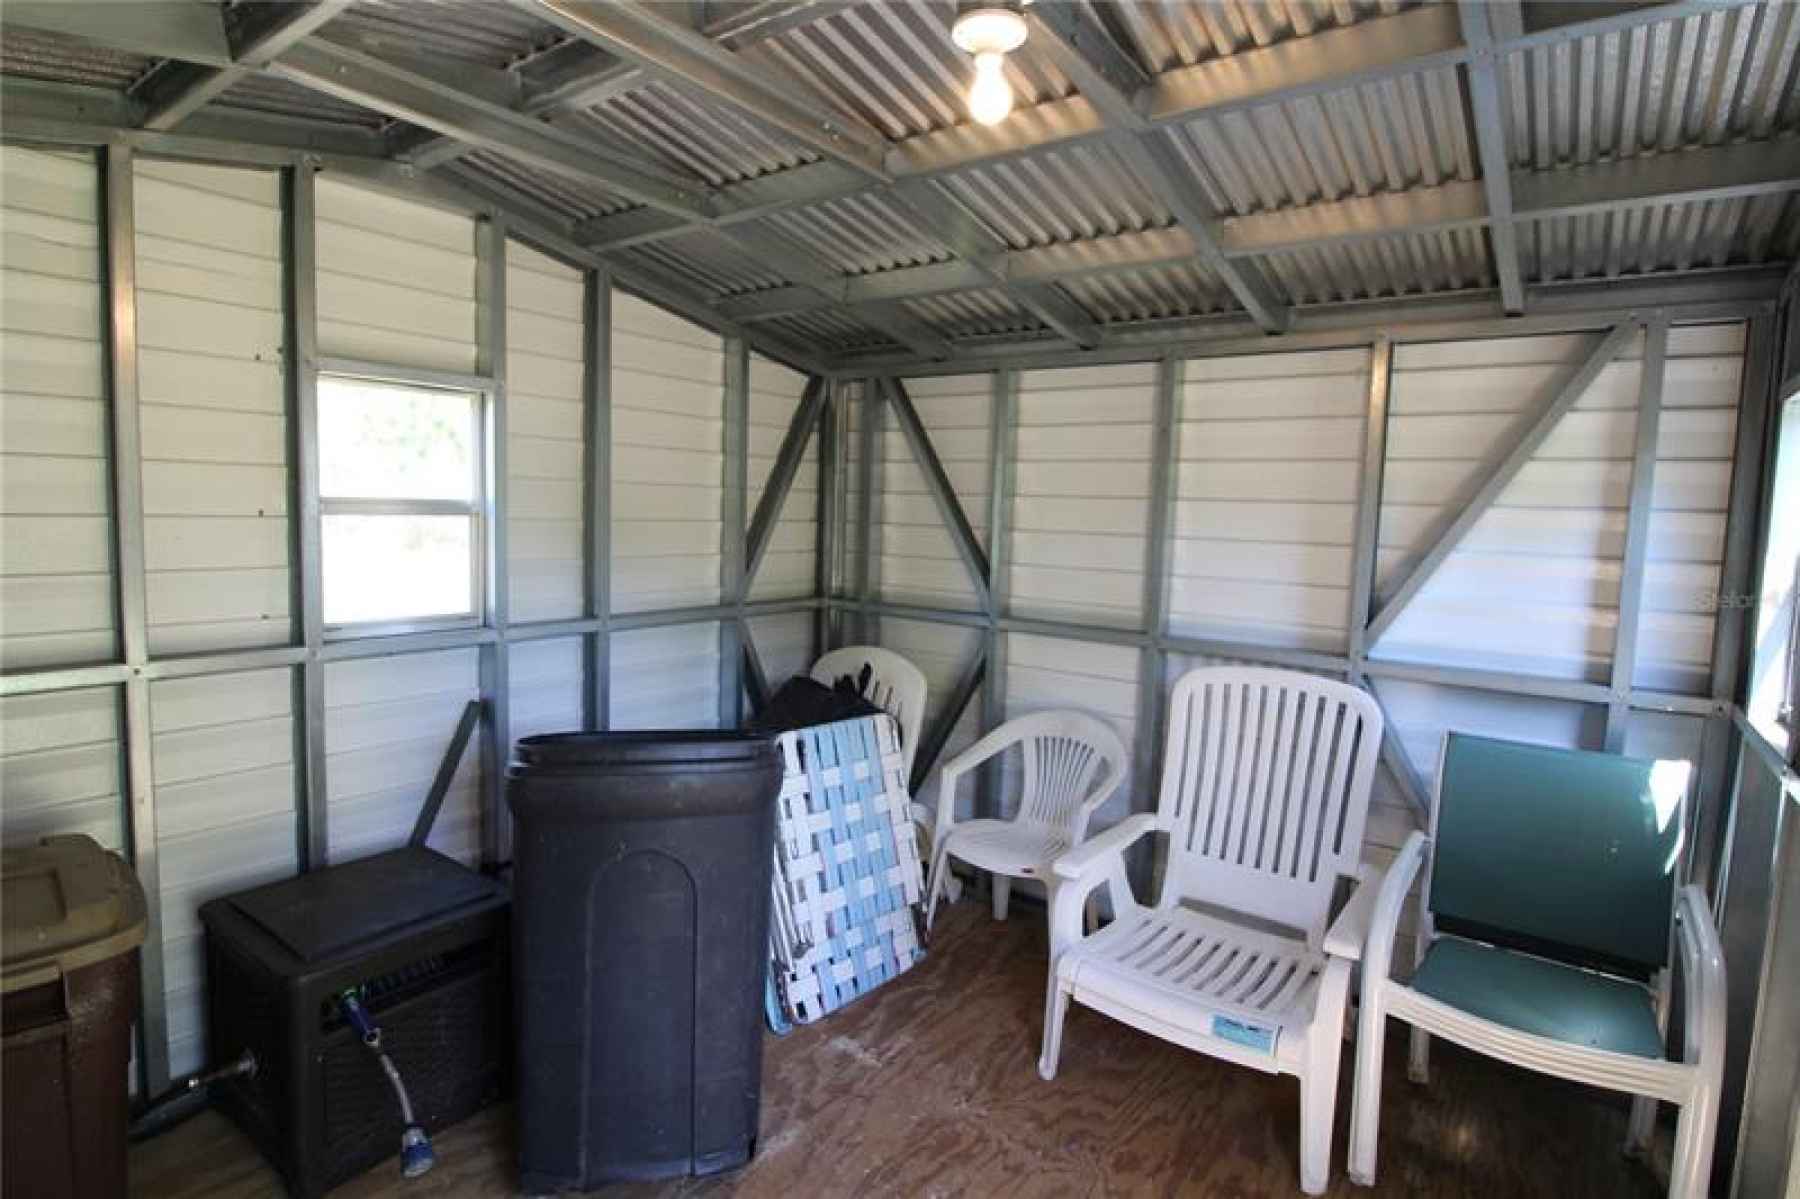 Shed has plenty of room for a riding mower and storage